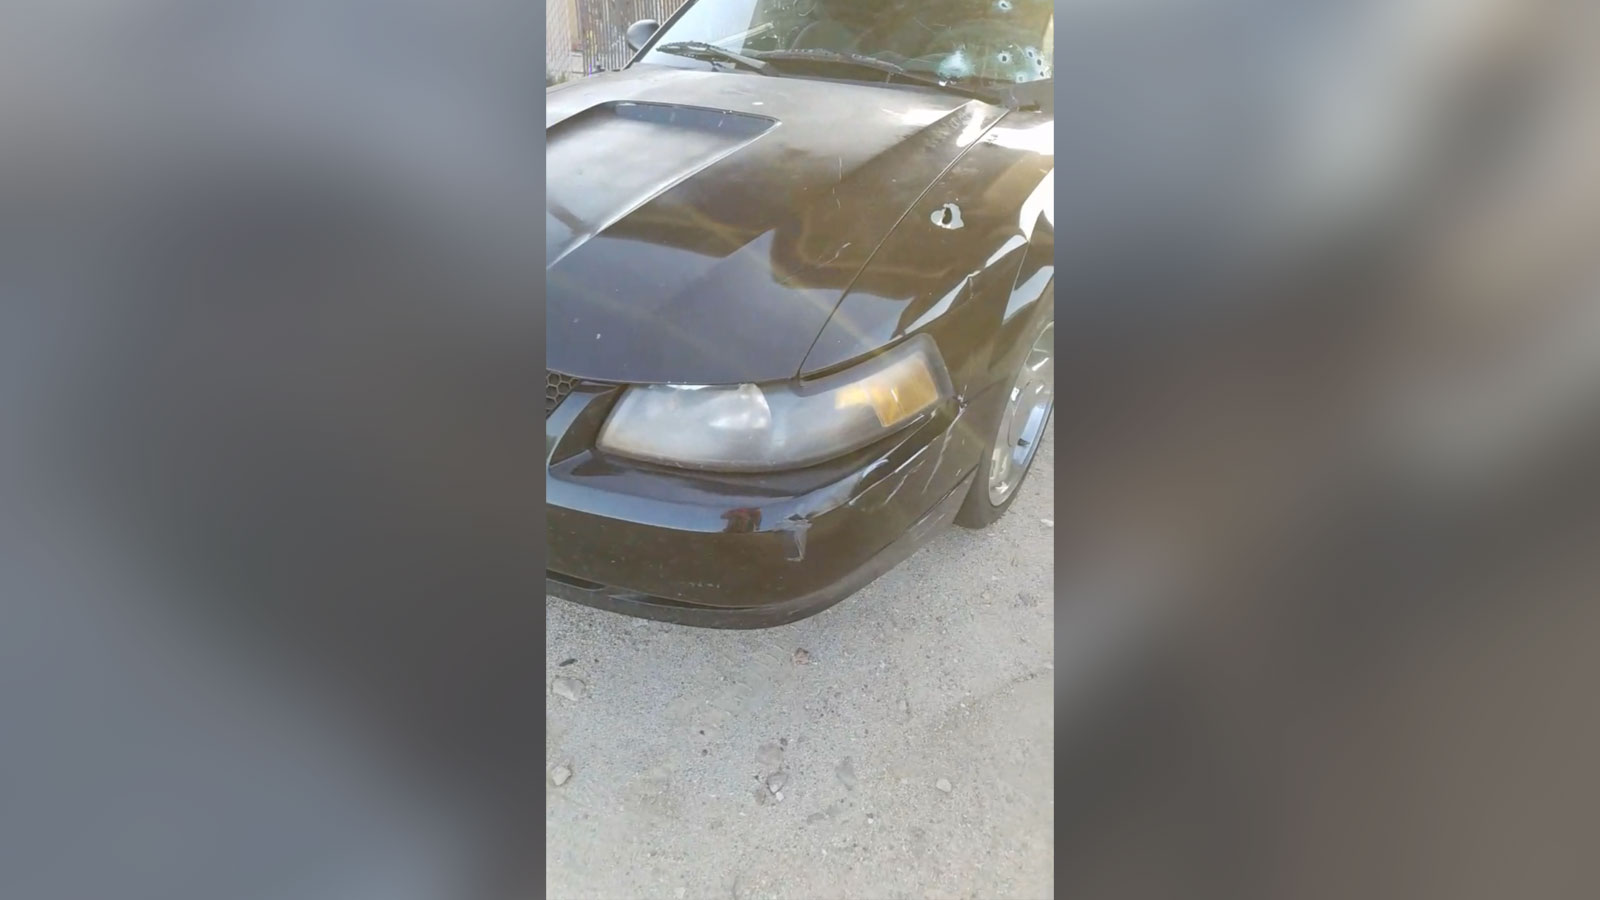 PHOTO: Diante Yarber, 26, was driving this Ford Mustang when Barstow police officers shot into the vehicle and killed him.